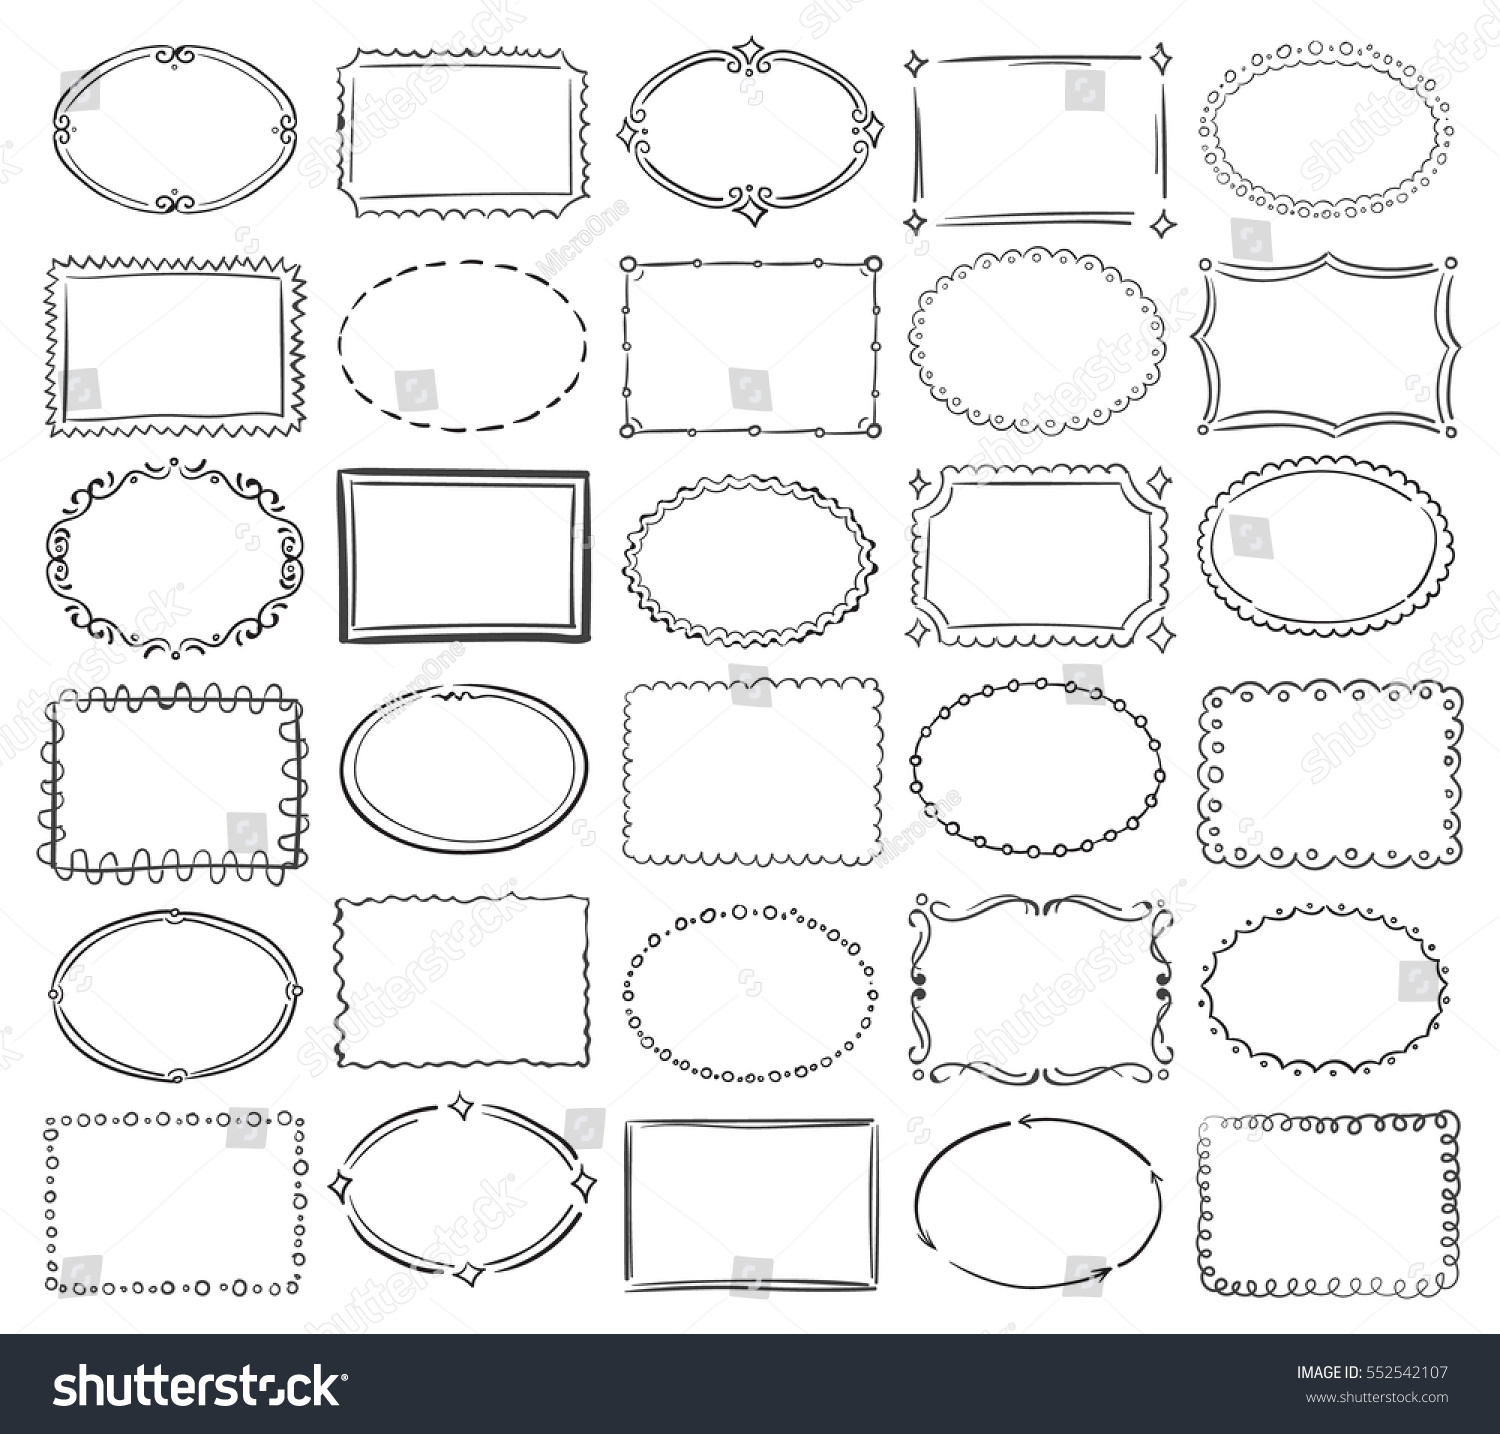 image editor clipart frames download - photo #21